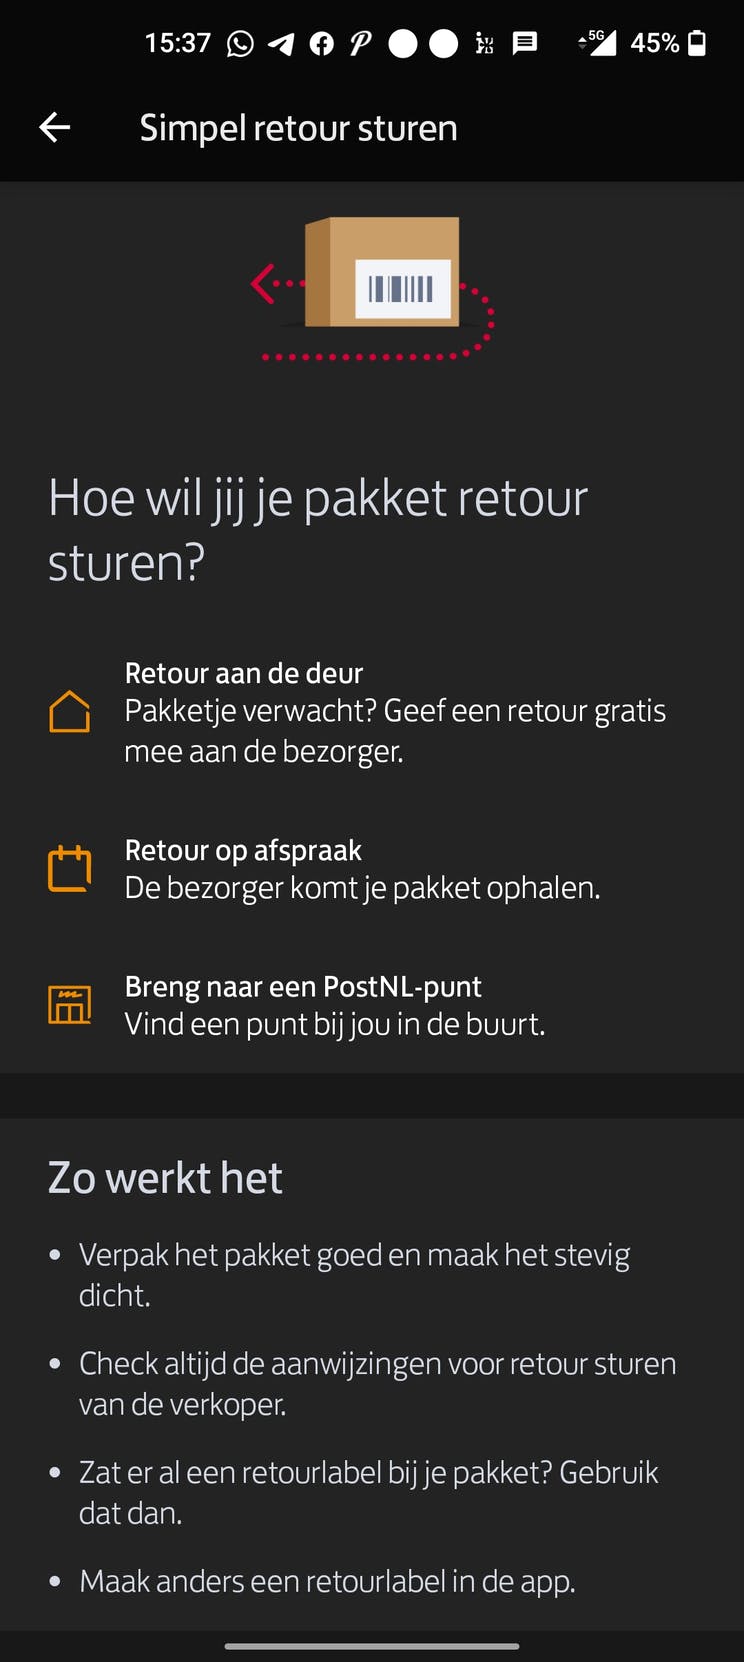 PostNL will allow you to easily return a parcel by appointment